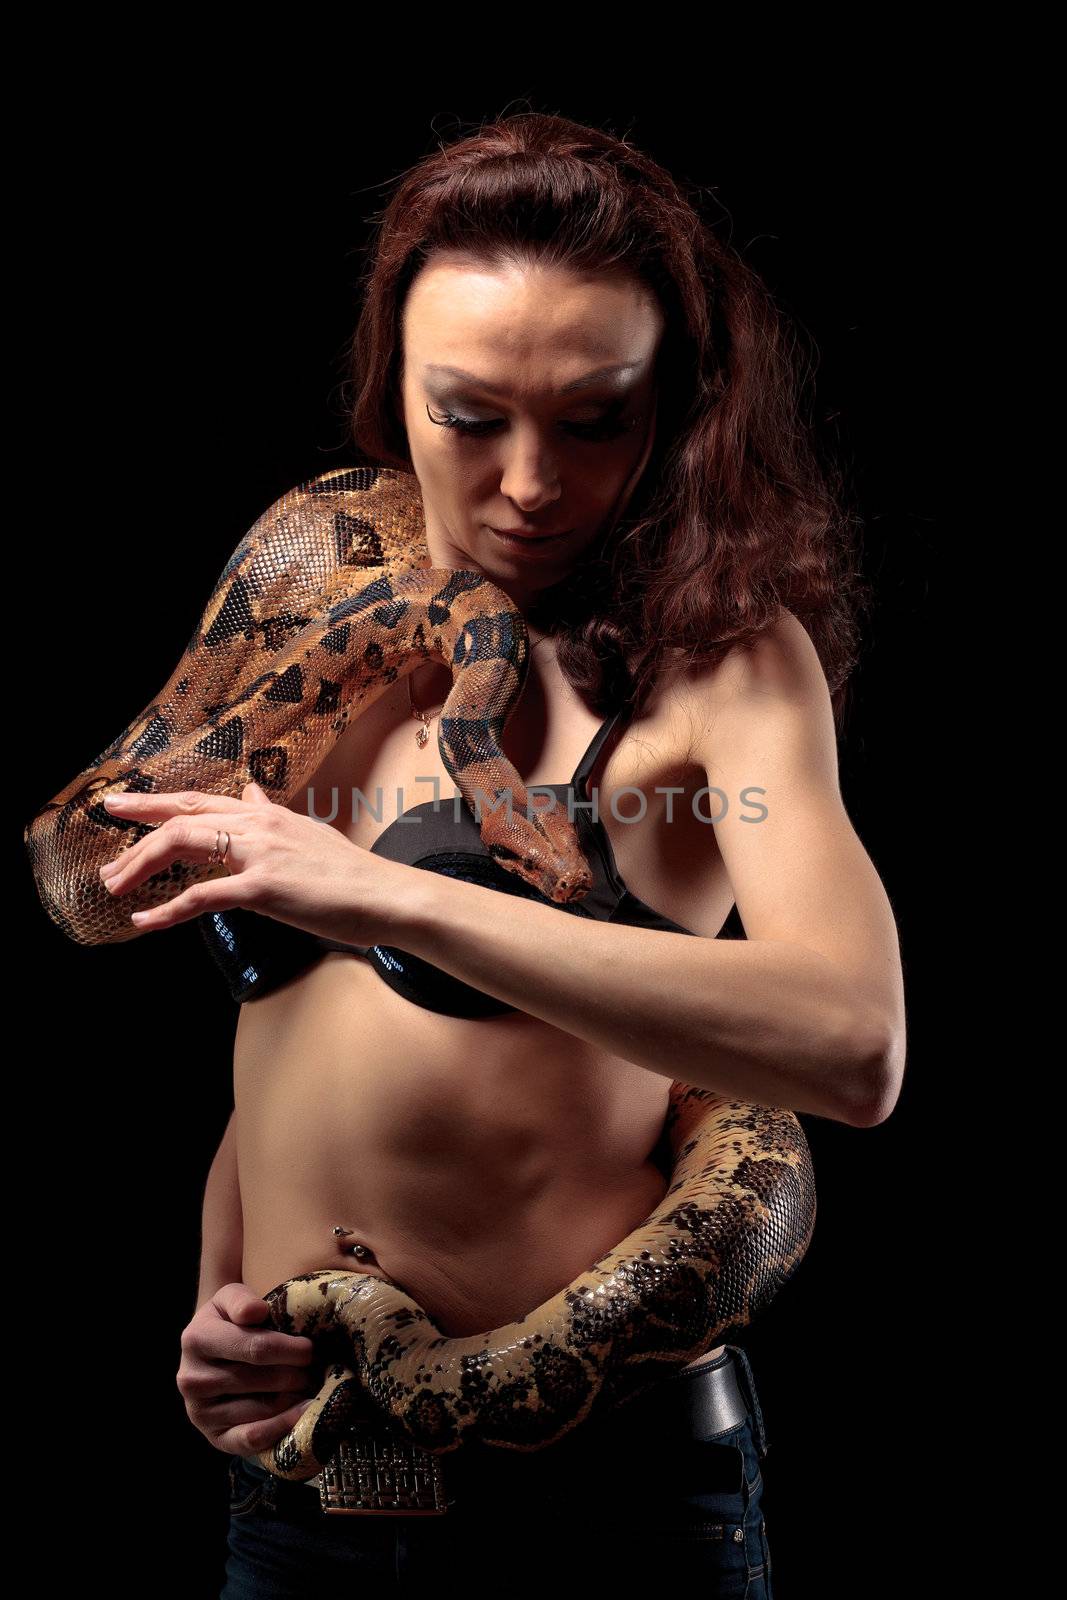 Mysterious beautiful exotic woman with a boa entwined around her body standing in shadows on a dark background